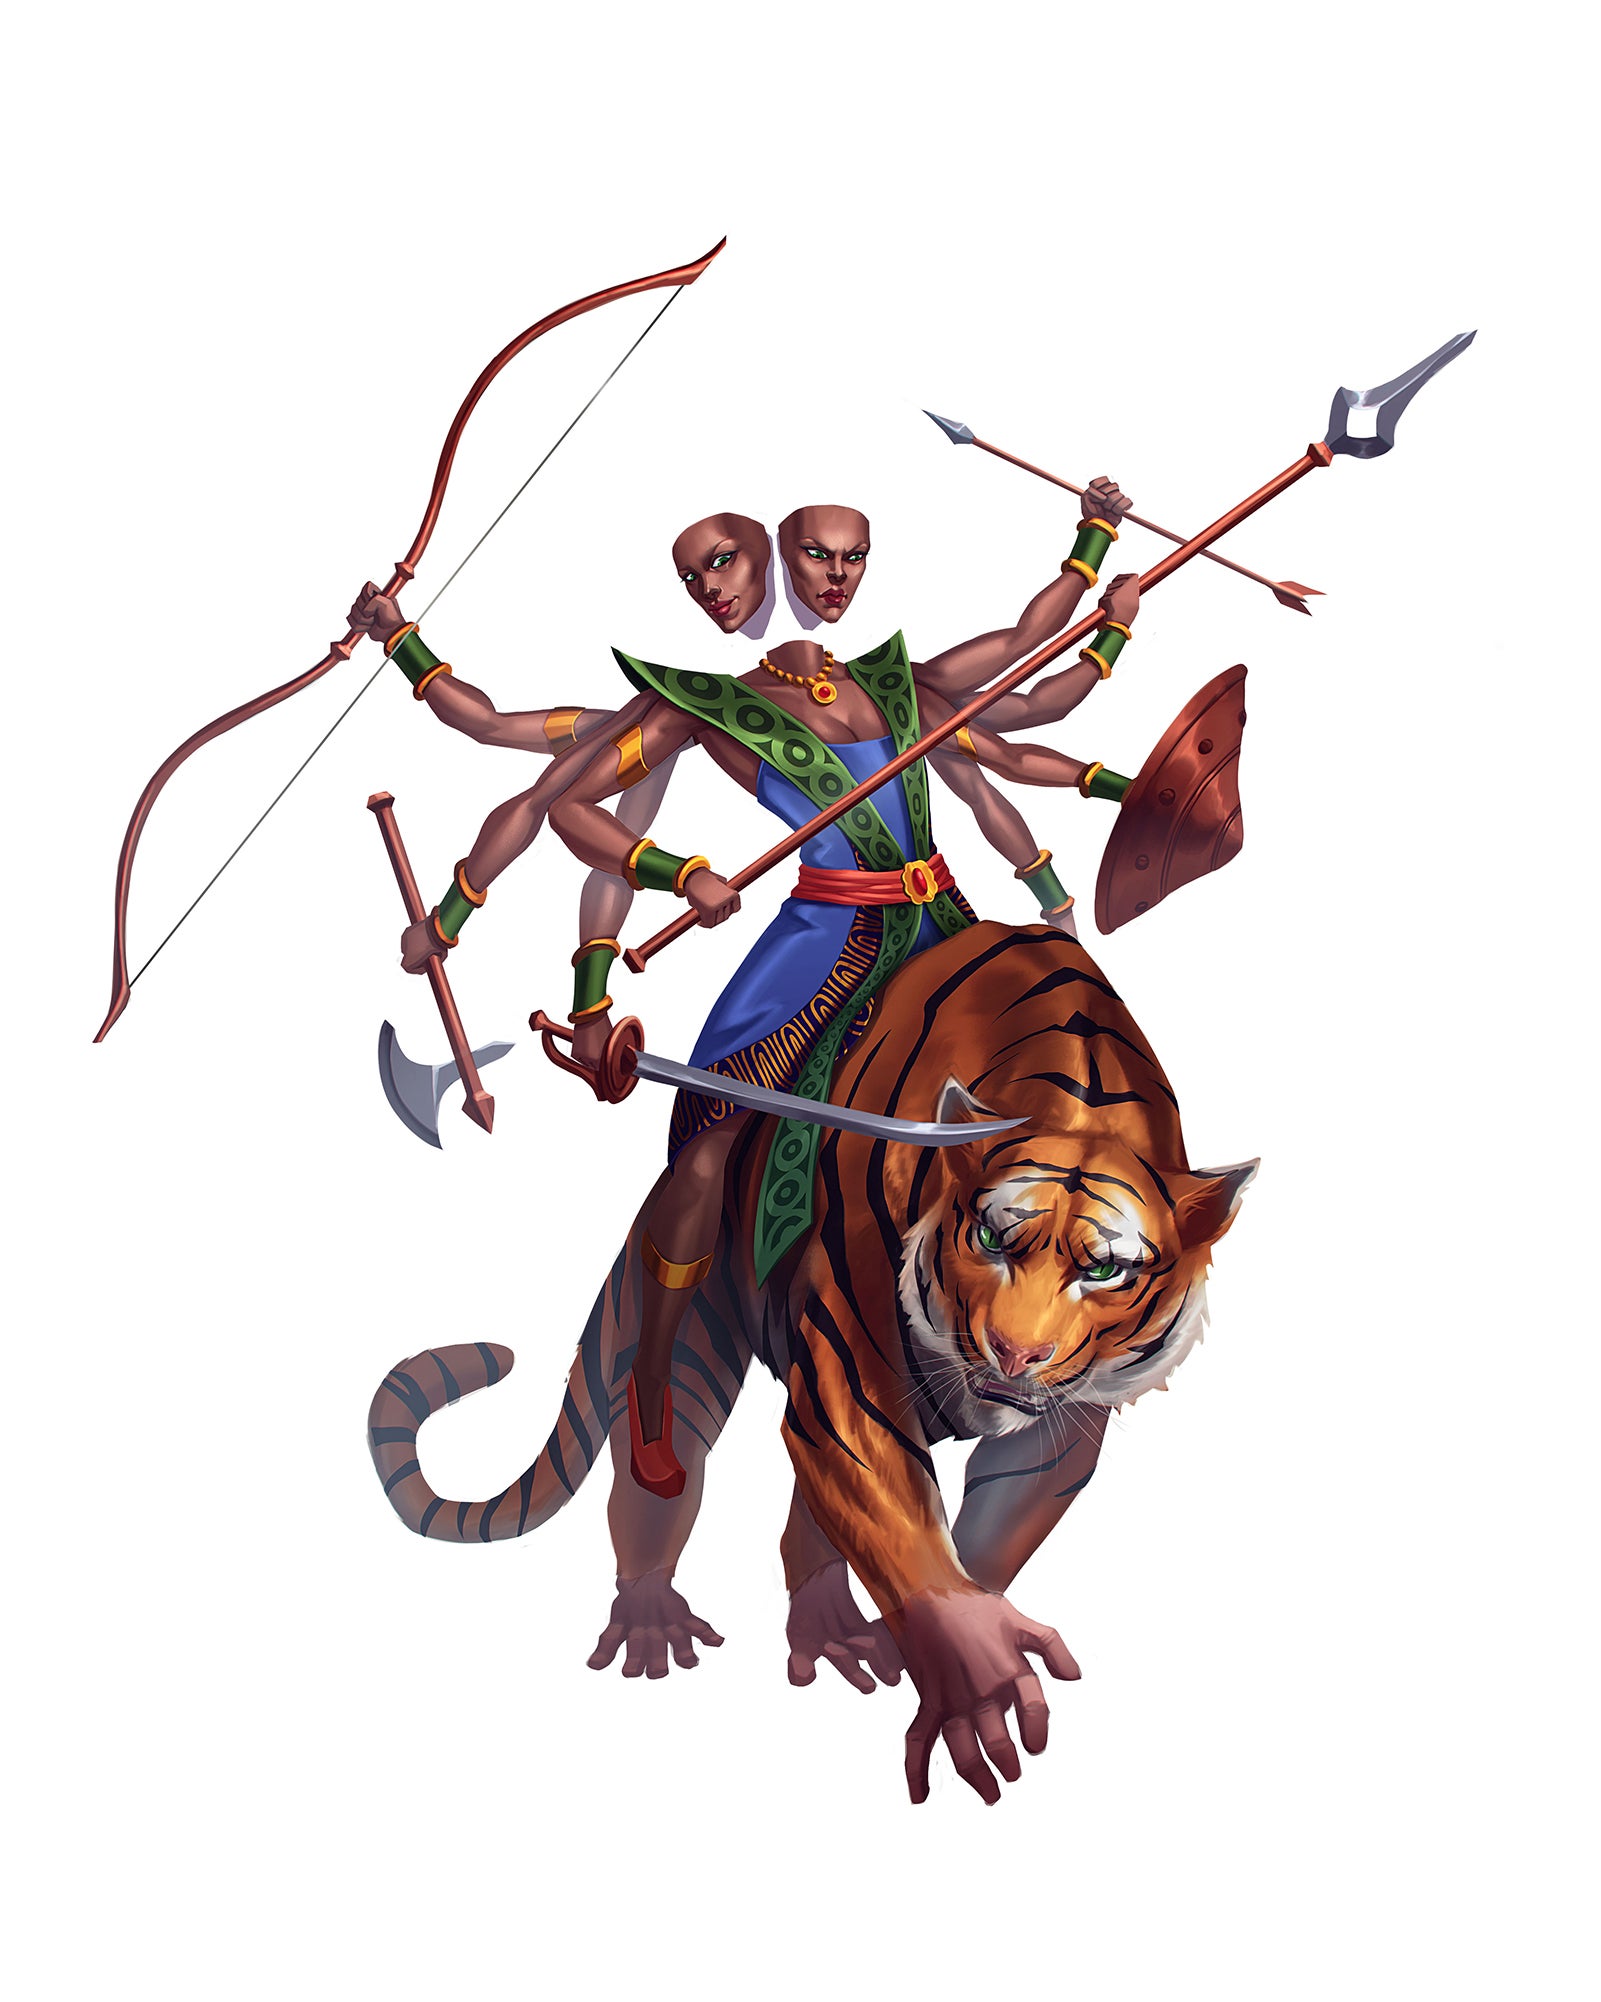 A bronze-skinned woman with eight arms and four faces sits atop a tiger with human hands instead of paws.